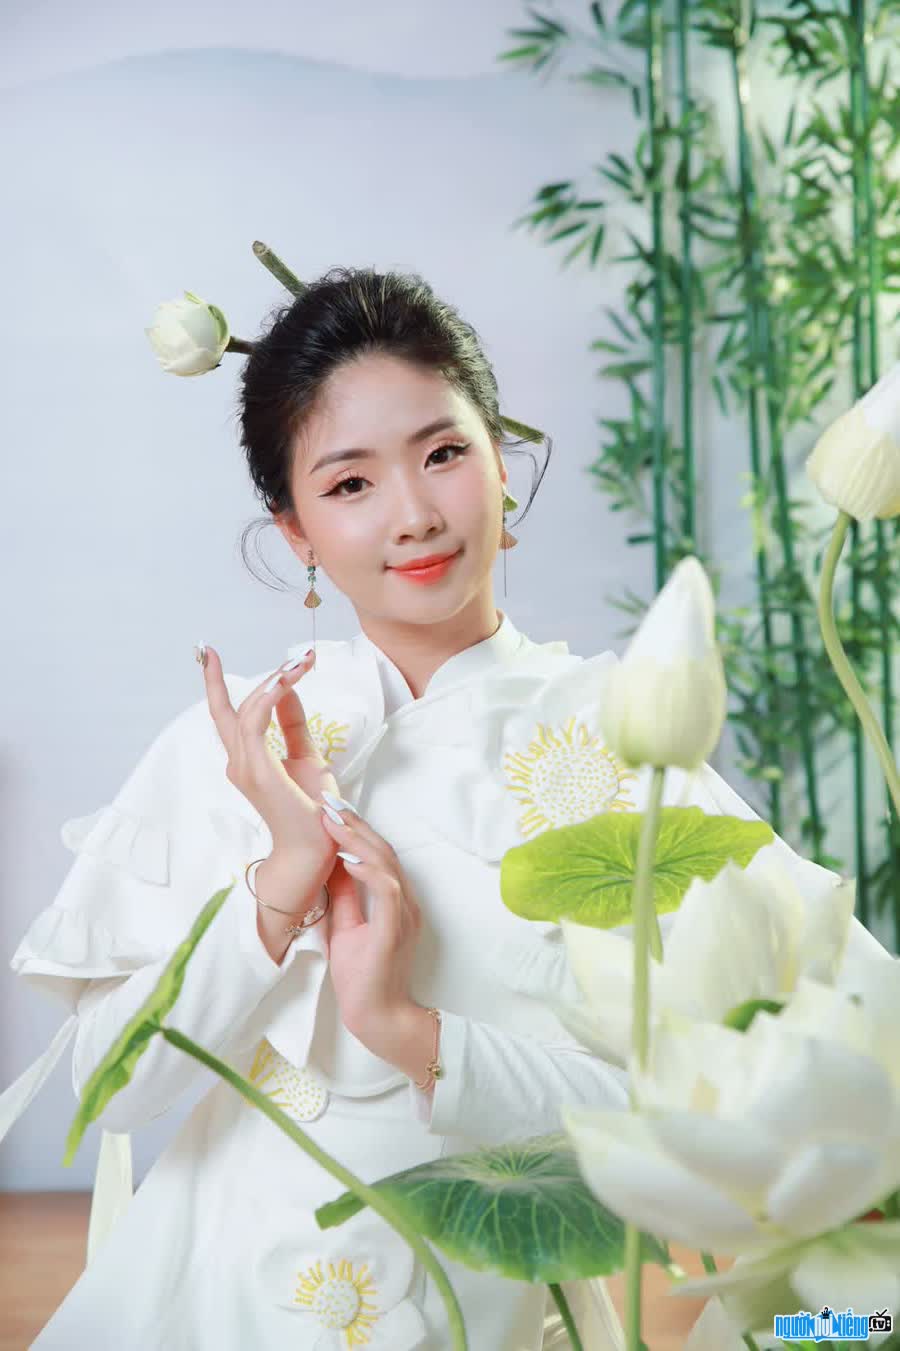 Image of singer Mai Thu Huong competing with lotus flowers